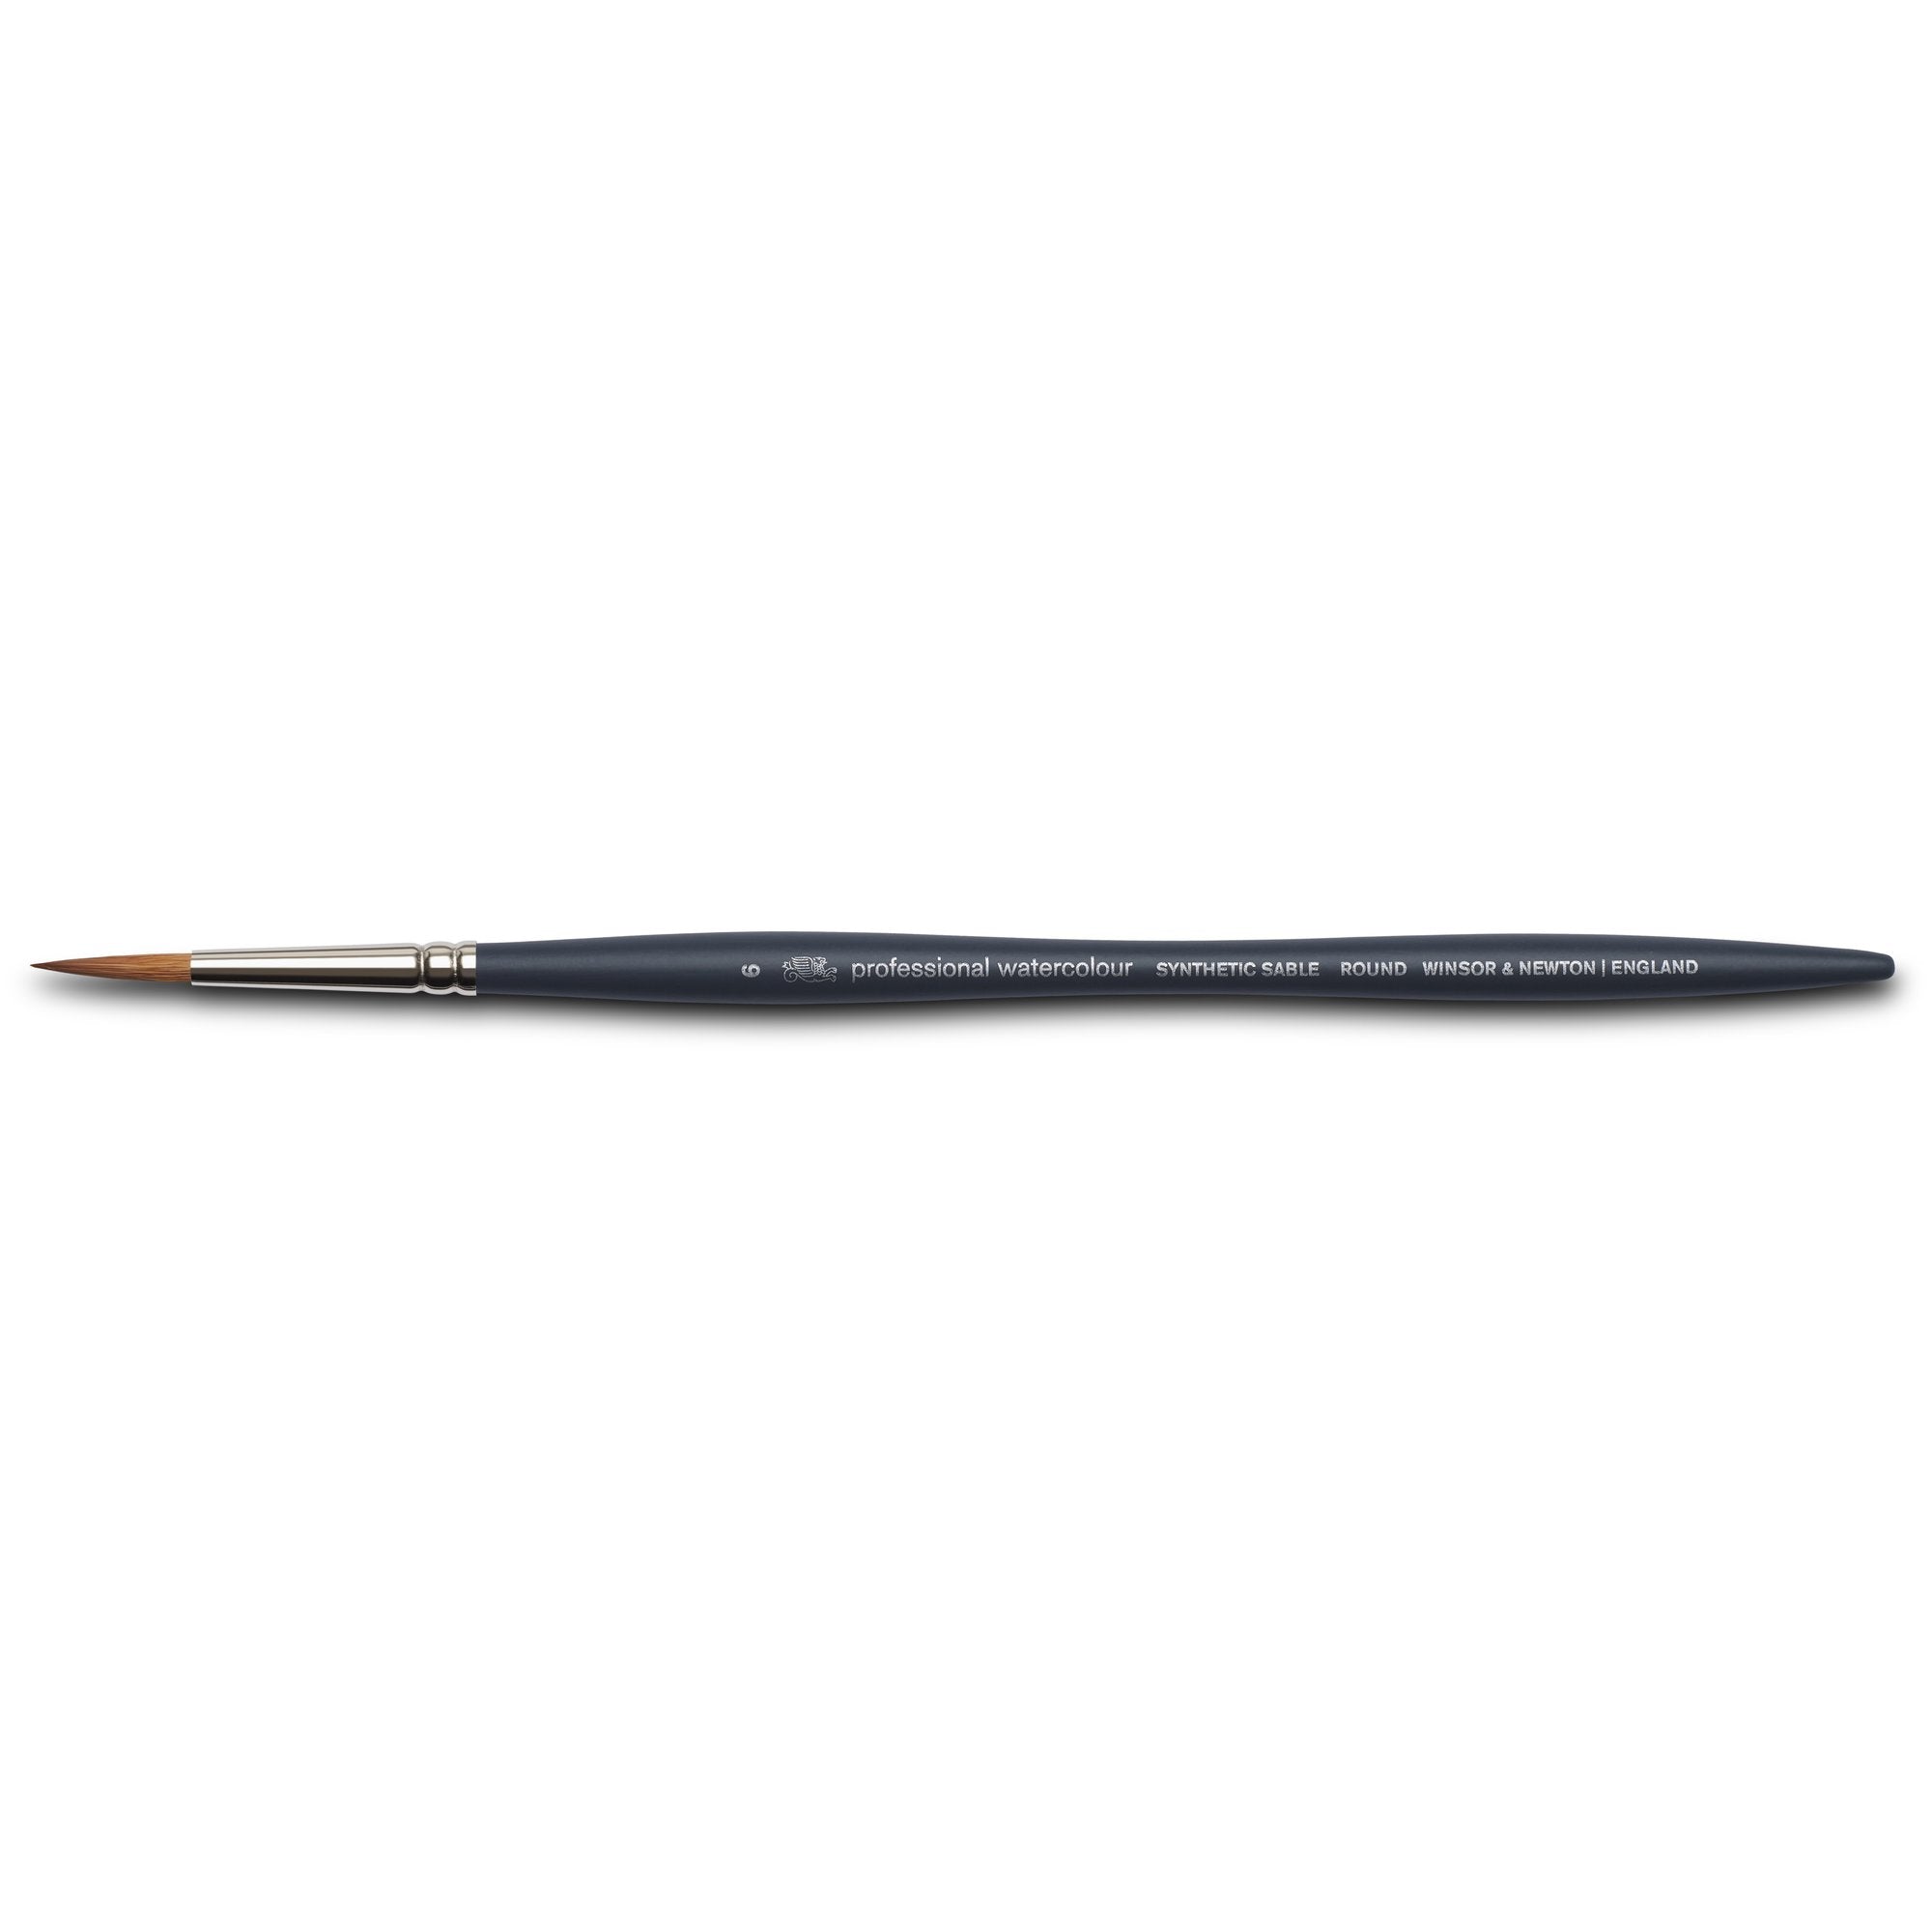 Winsor & Newton Professional Watercolour Synthetic Sable Brush Round 6